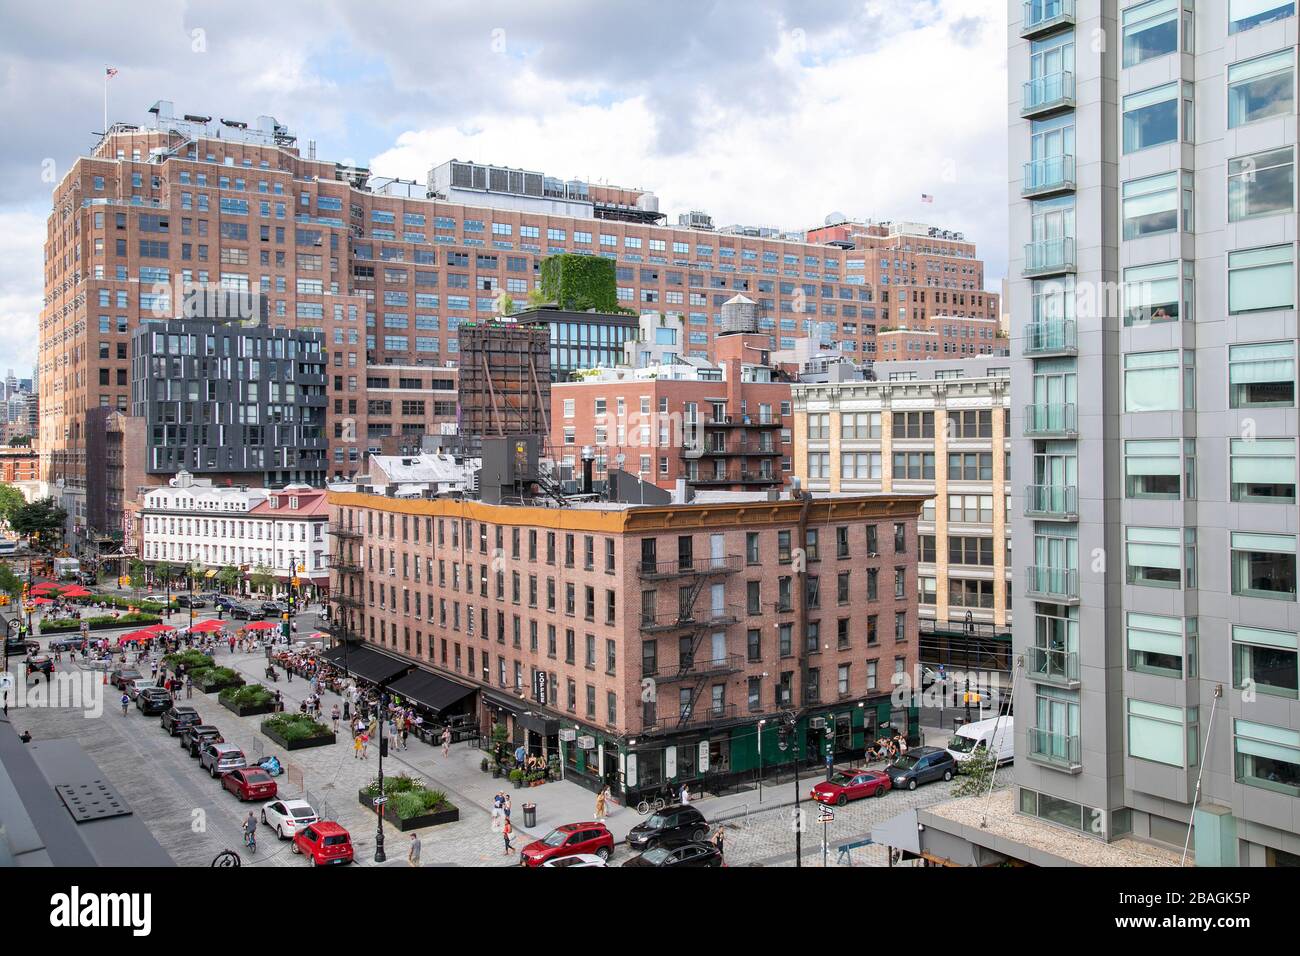 A busy summer day in the Meatpacking District, New York City. Stock Photo